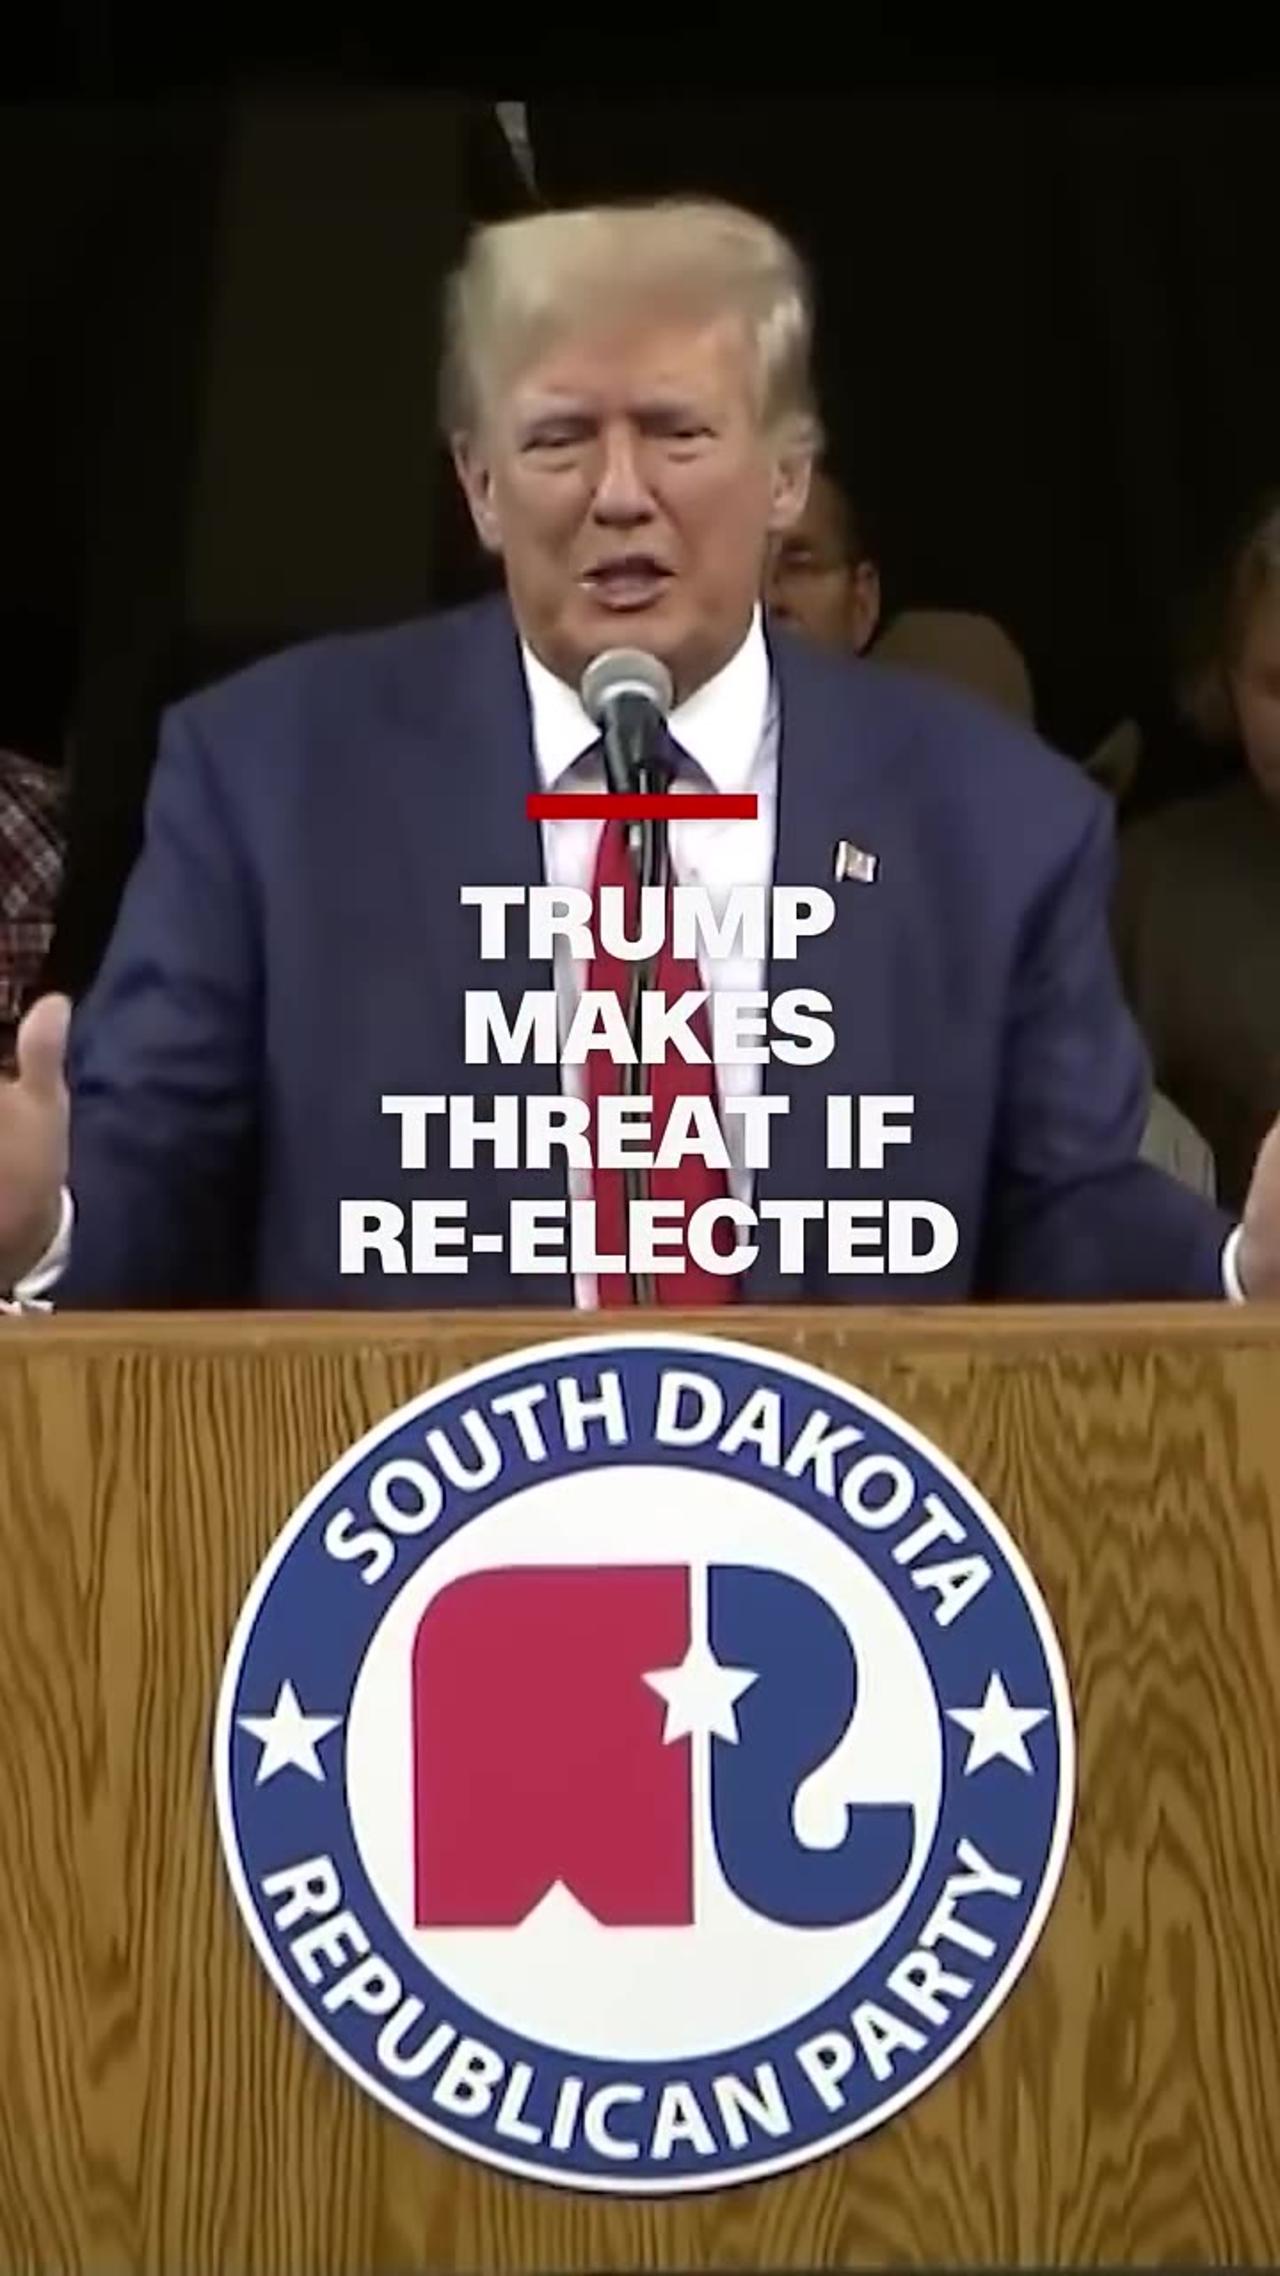 Trump makes threat if re-elected..